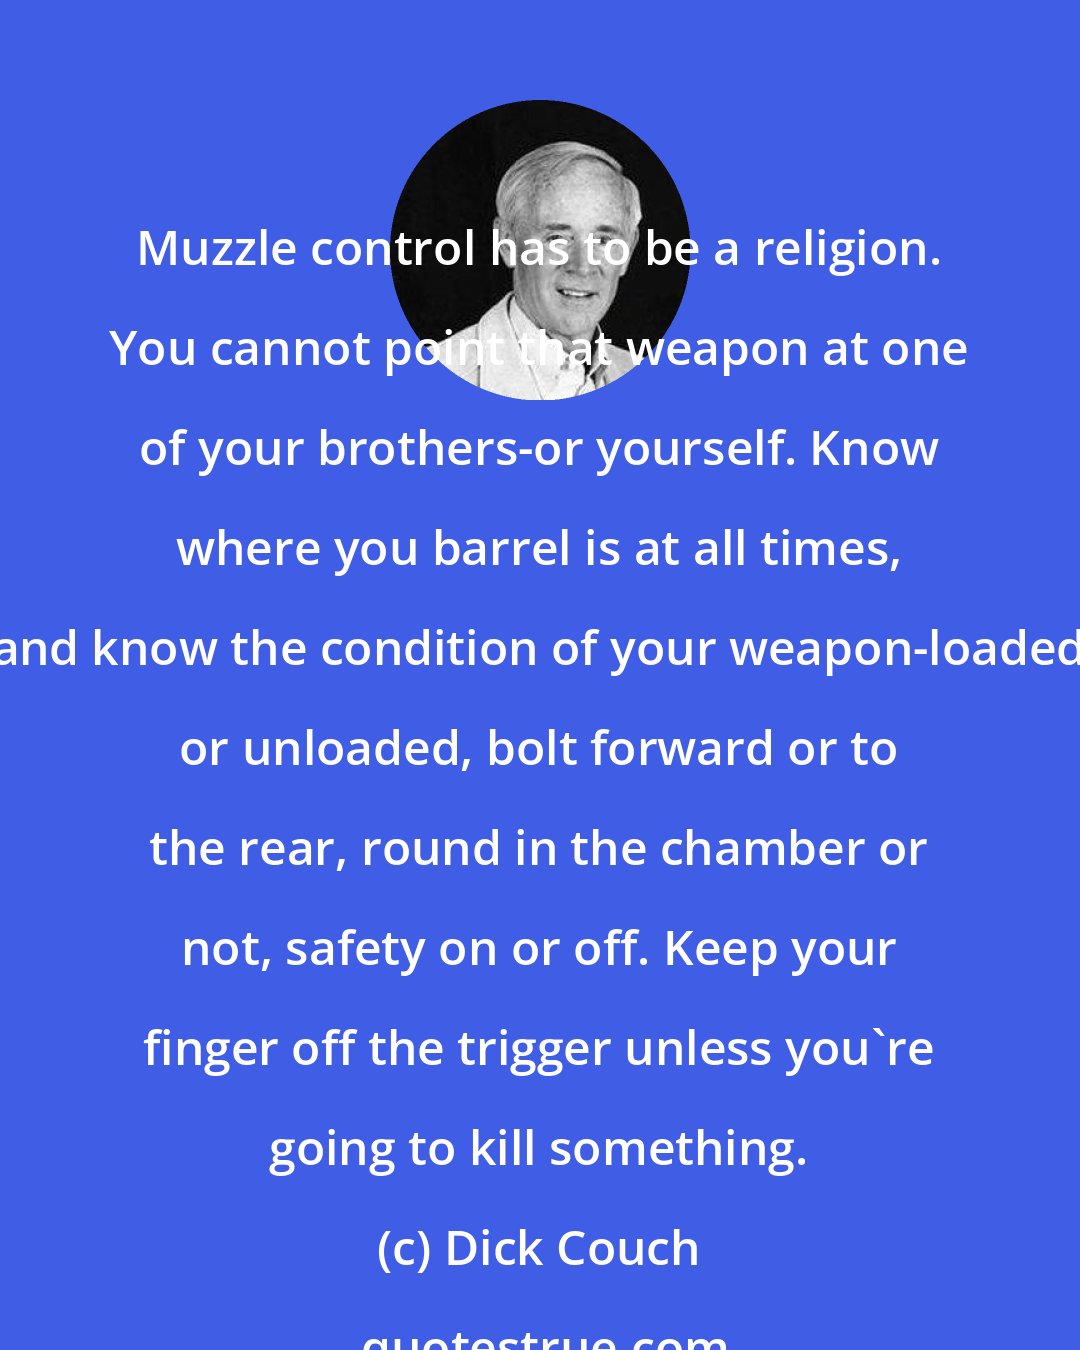 Dick Couch: Muzzle control has to be a religion. You cannot point that weapon at one of your brothers-or yourself. Know where you barrel is at all times, and know the condition of your weapon-loaded or unloaded, bolt forward or to the rear, round in the chamber or not, safety on or off. Keep your finger off the trigger unless you're going to kill something.